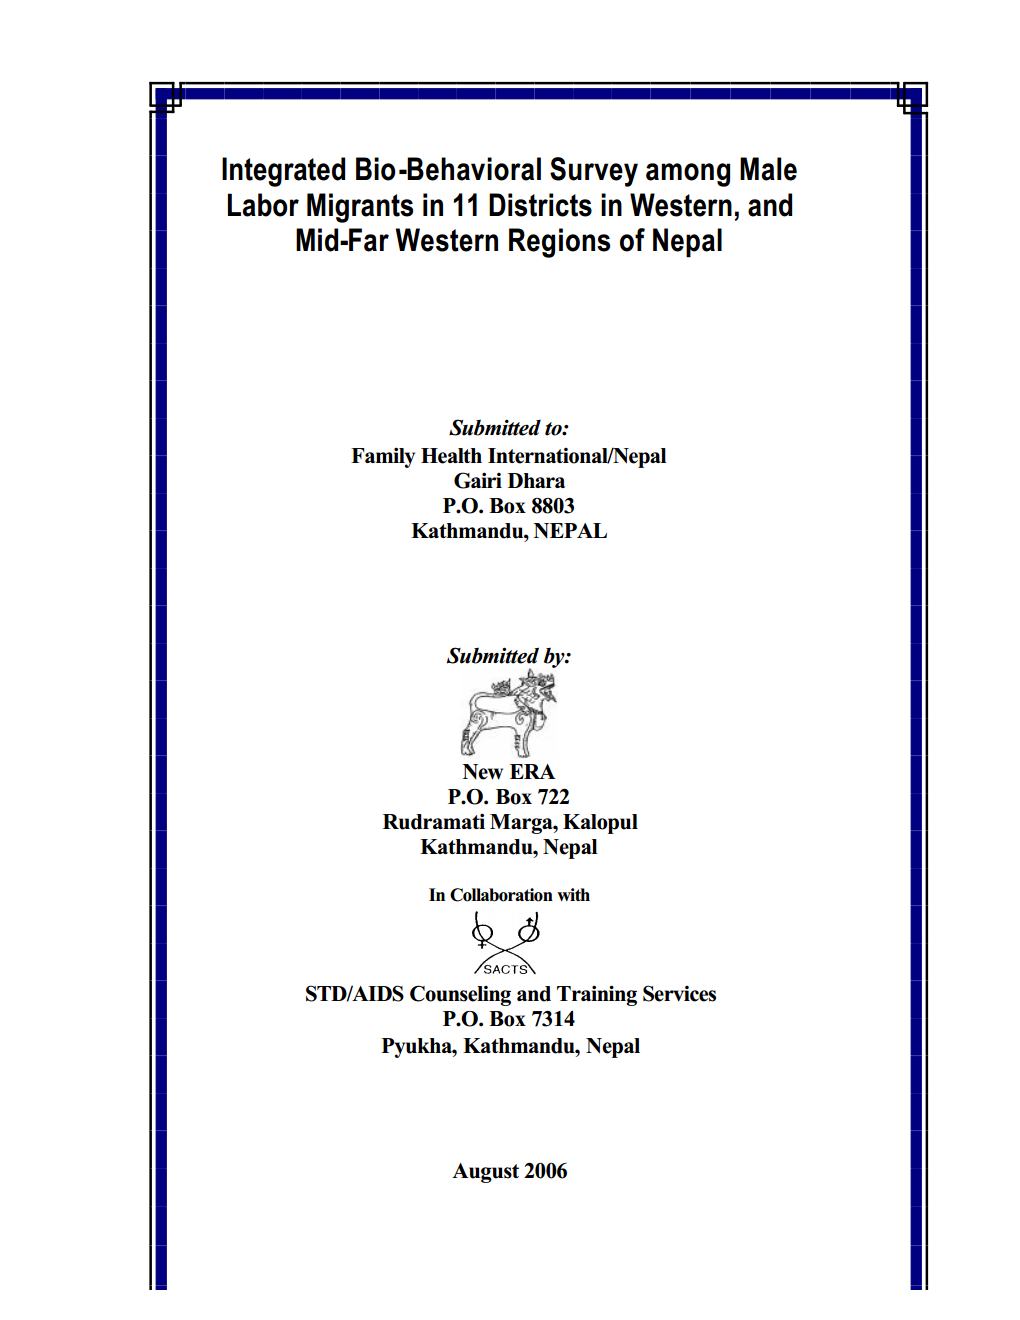 Integrated Bio-Behavioral Survey among Male Labour Migrant in 11 Districts in Western, and Mid-FarWestern Regions of Nepal-2005